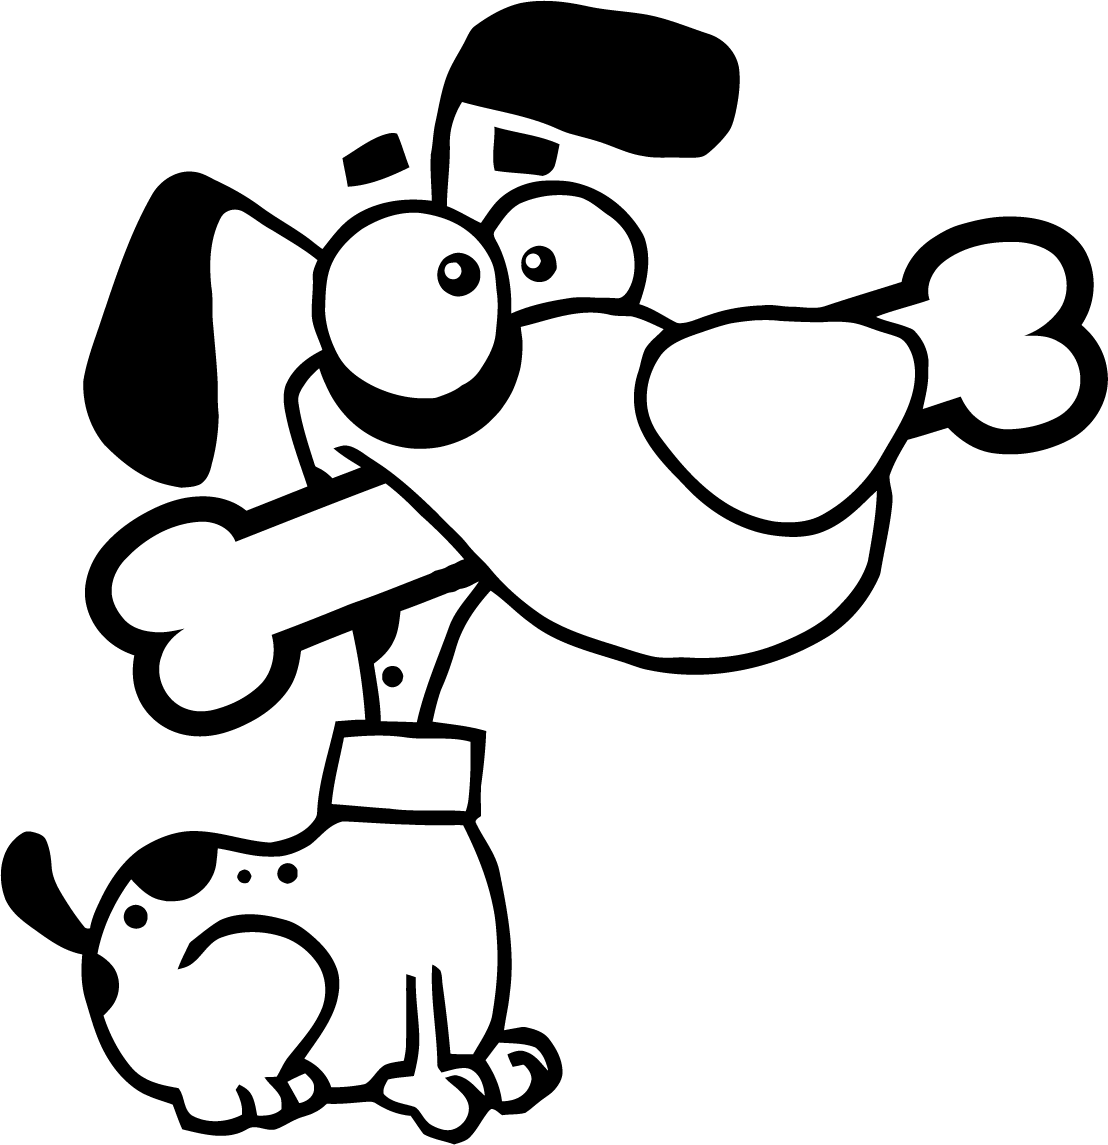 Dog clipart black and white printable